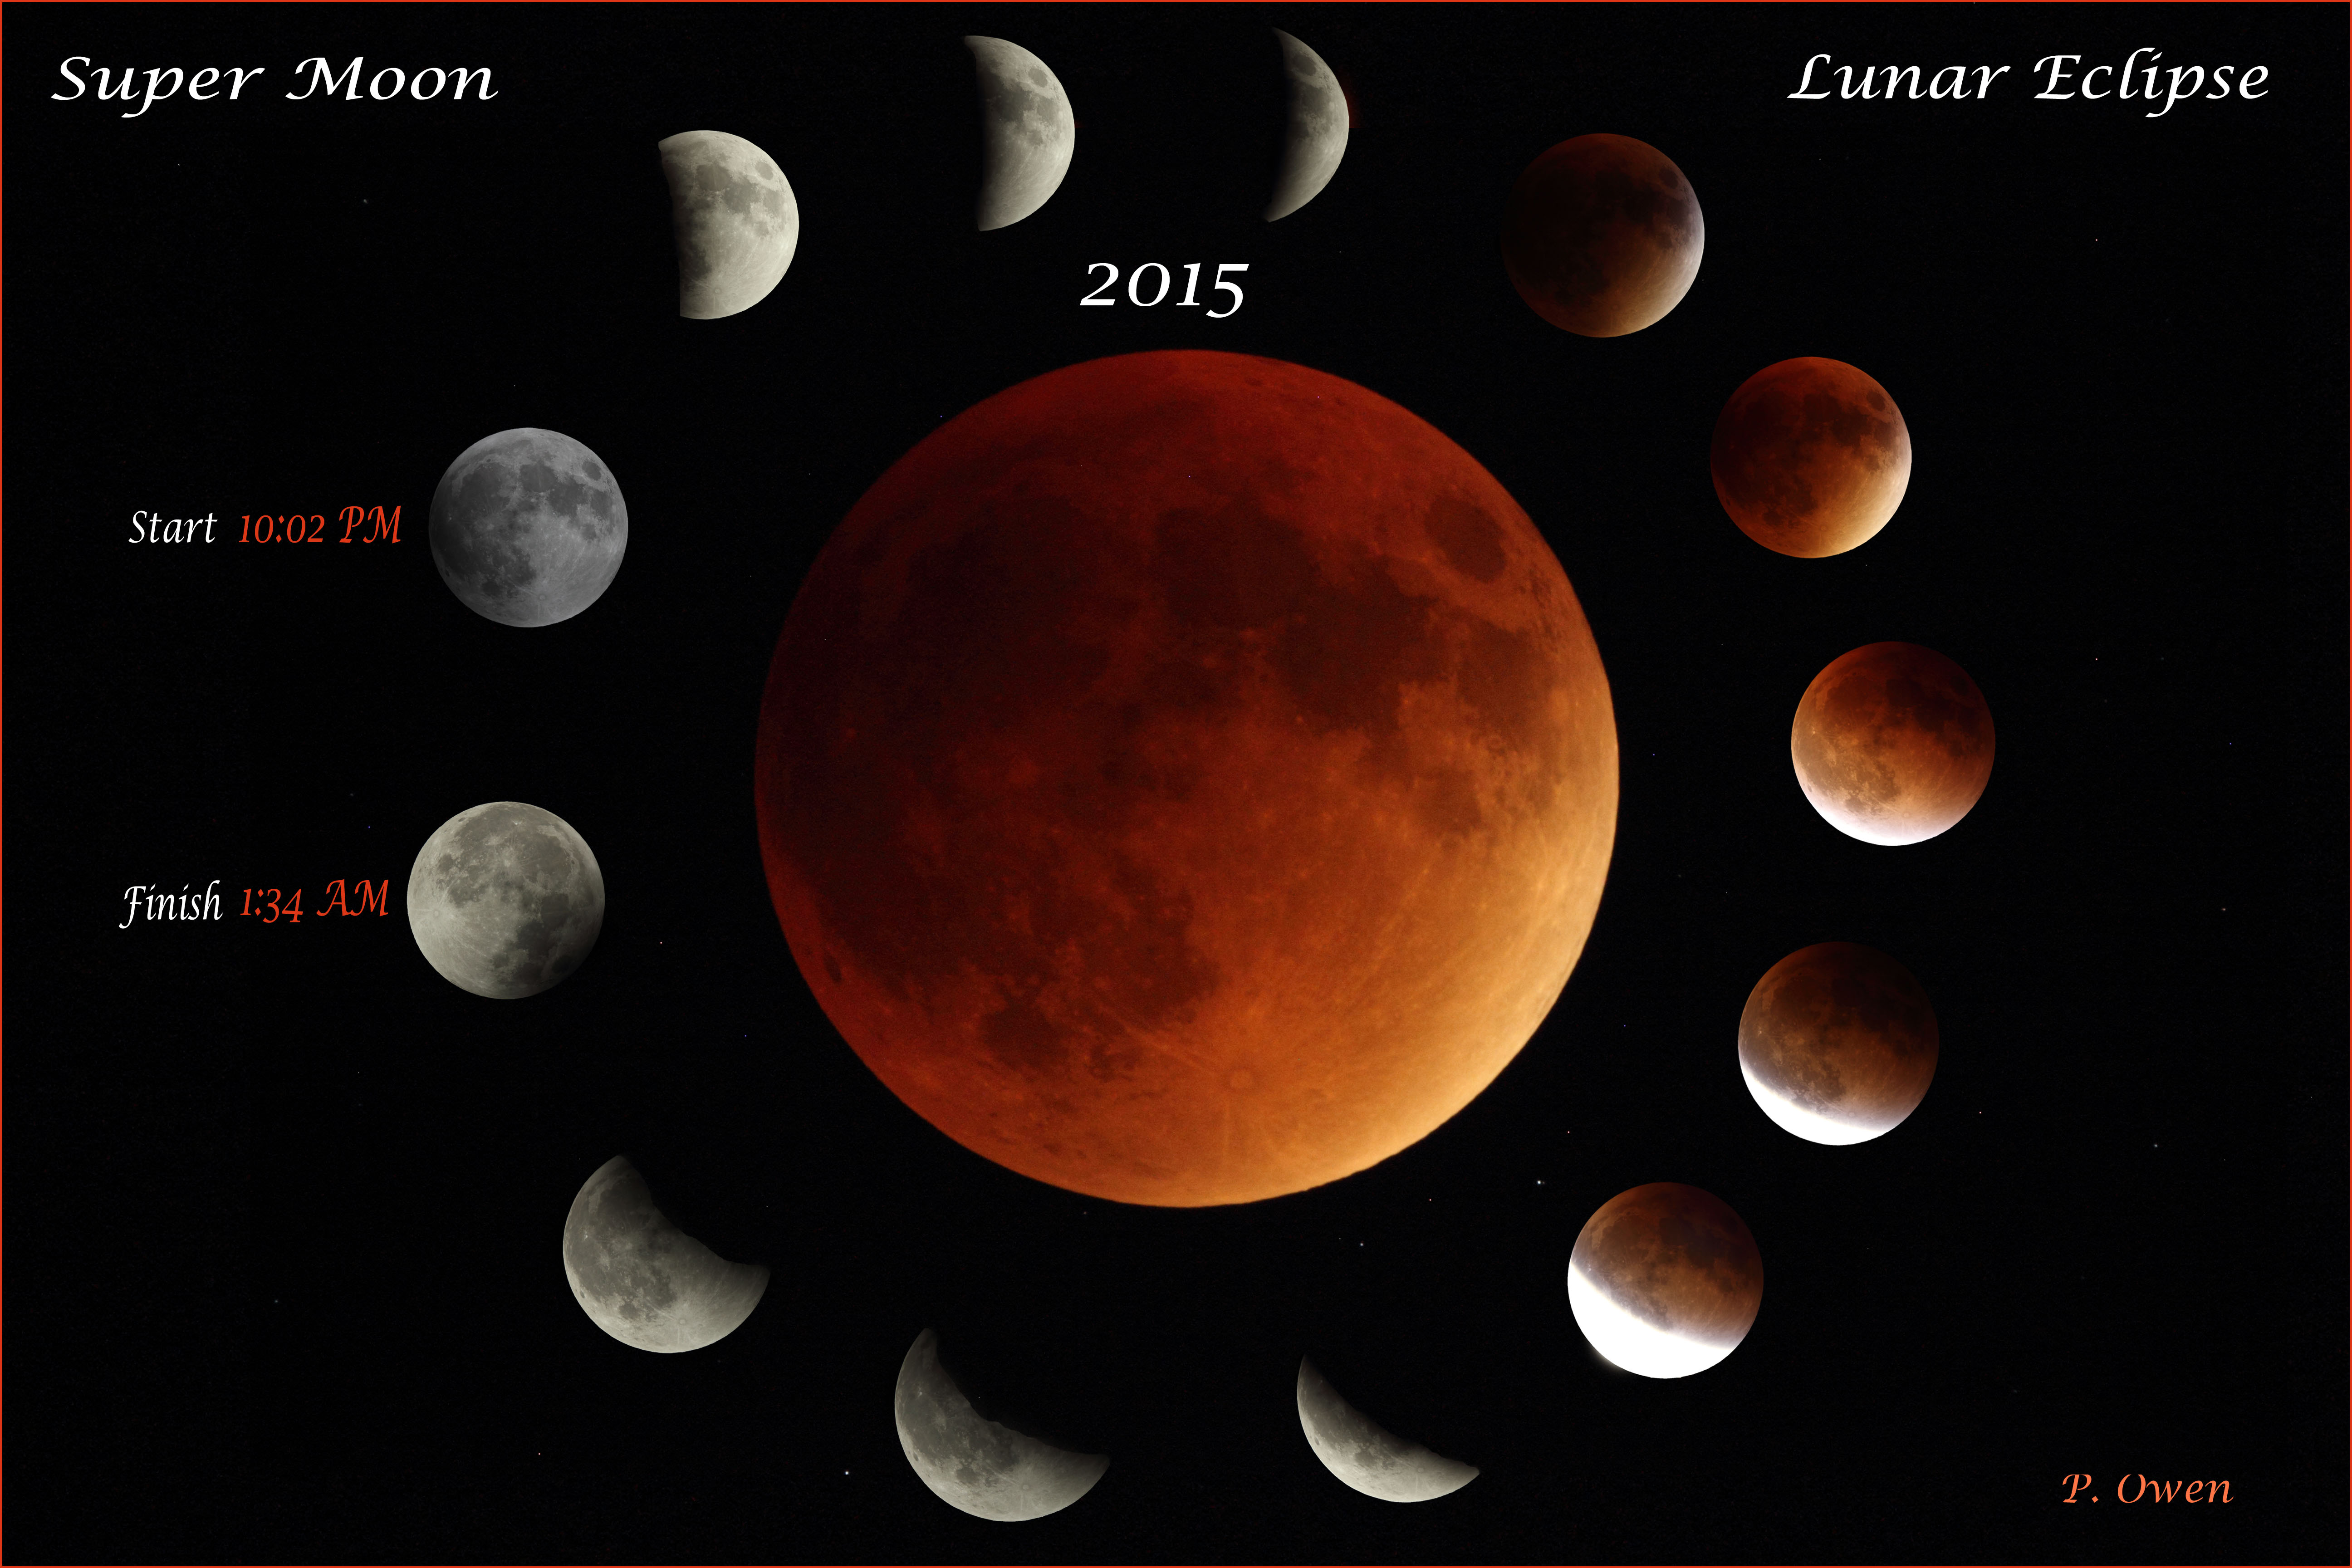 Photo showing a collage of the Super Moon Lunar Exclipse of 2015 by Paul Owen.